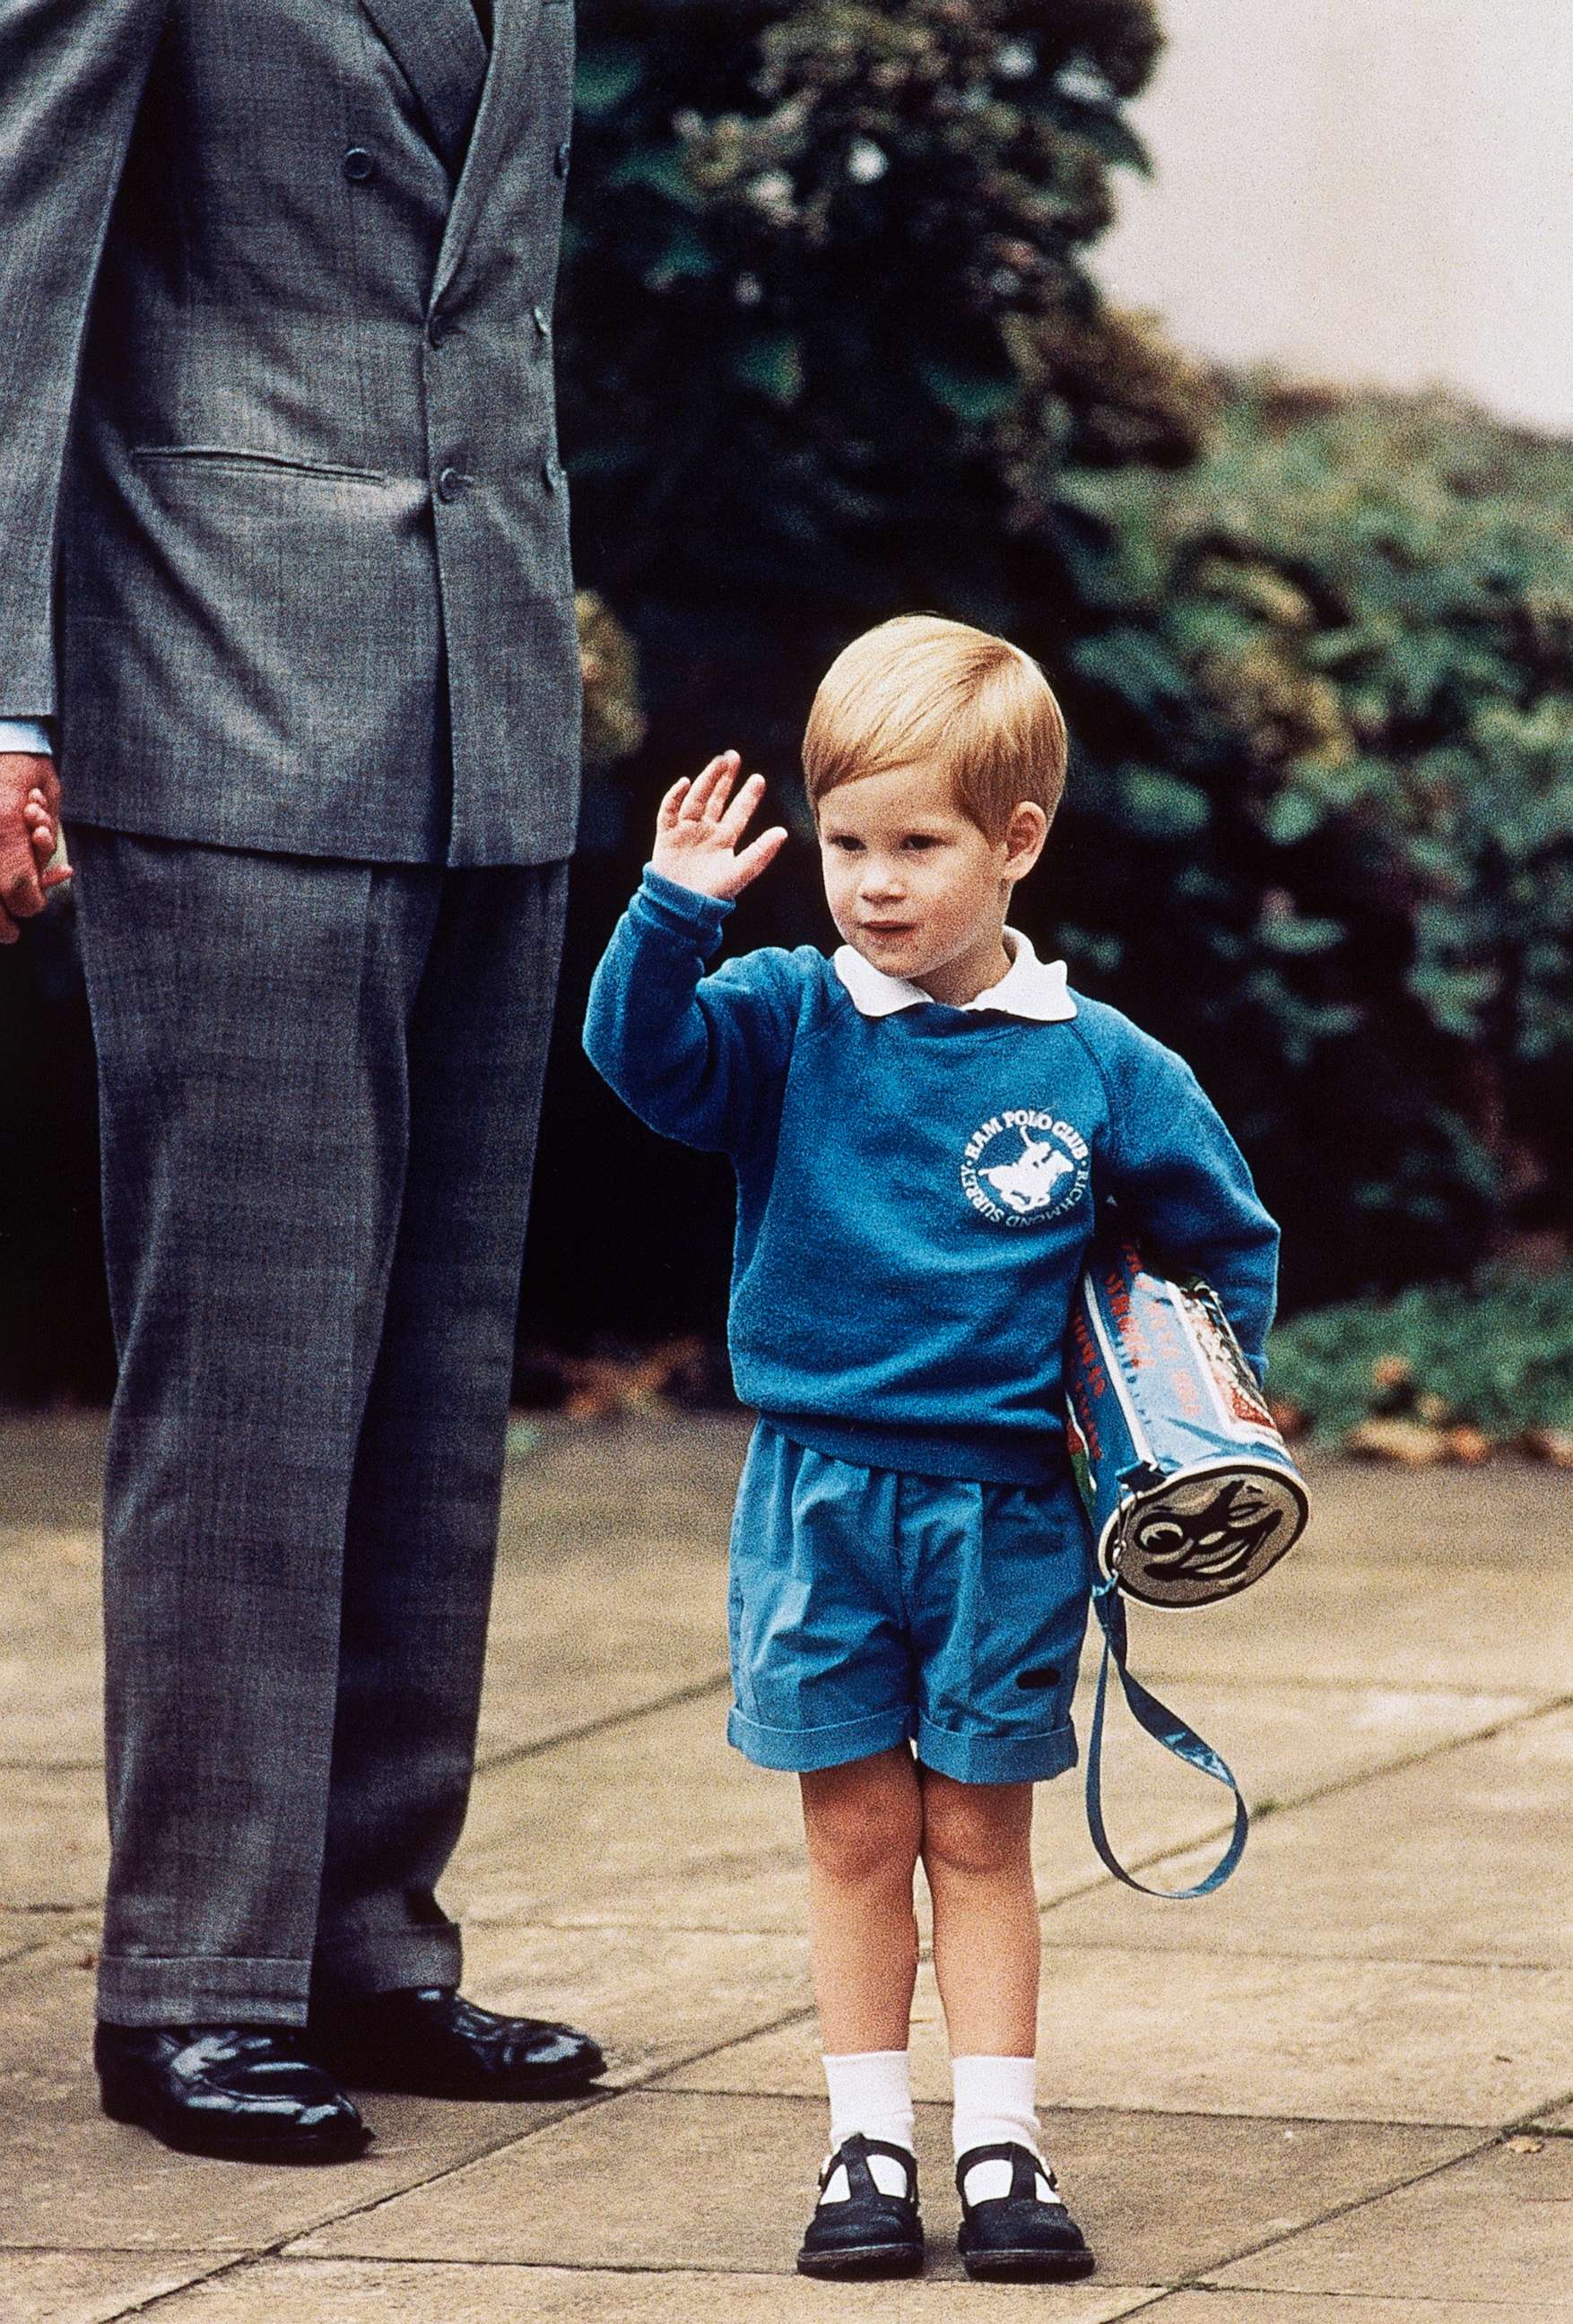 PHOTO: Britain's Prince Harry waves to photographers while holding a Thomas The Tank Engine bag on his first day at a kindergarten in Notting Hill, West London, Sept. 16, 1987.